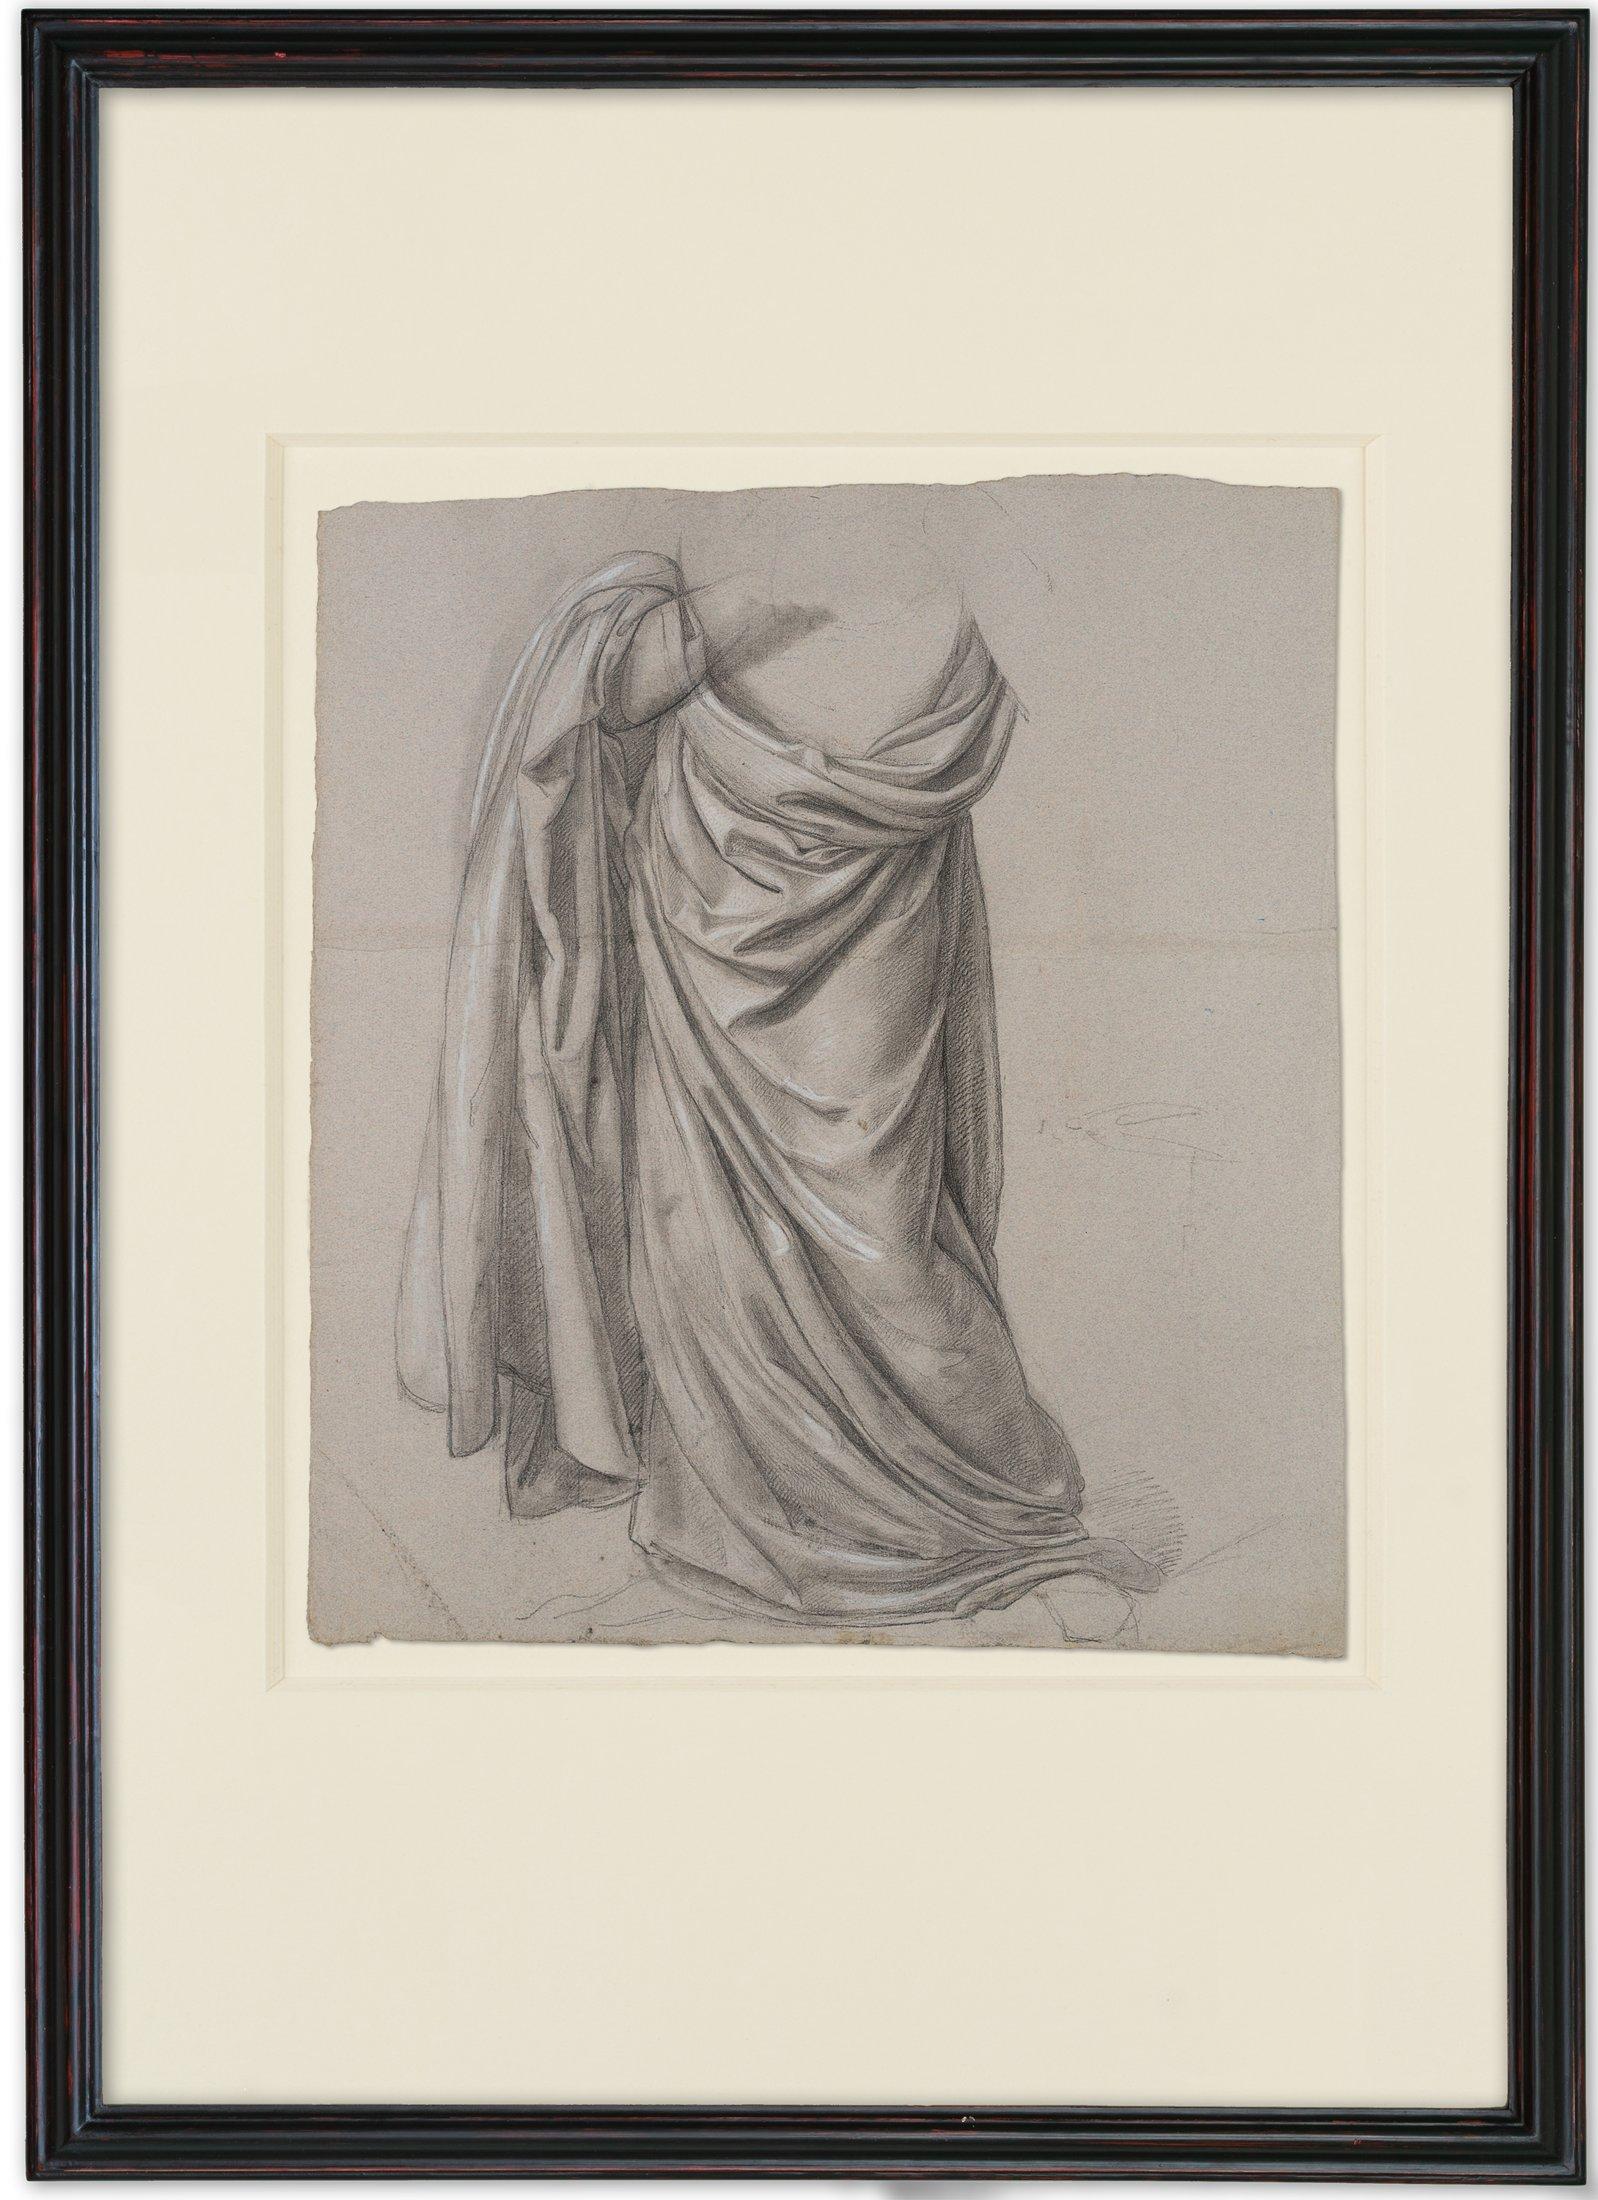 Trajan Wallis (1794 Florence - 1892 ): Garment Study as Costume Drapery, 19th century, Charcoal

Technique: White heightened Charcoal on Paper

Date: 19th century

Description:  Watermark: shield

Provenance: From the estate of the artist.

